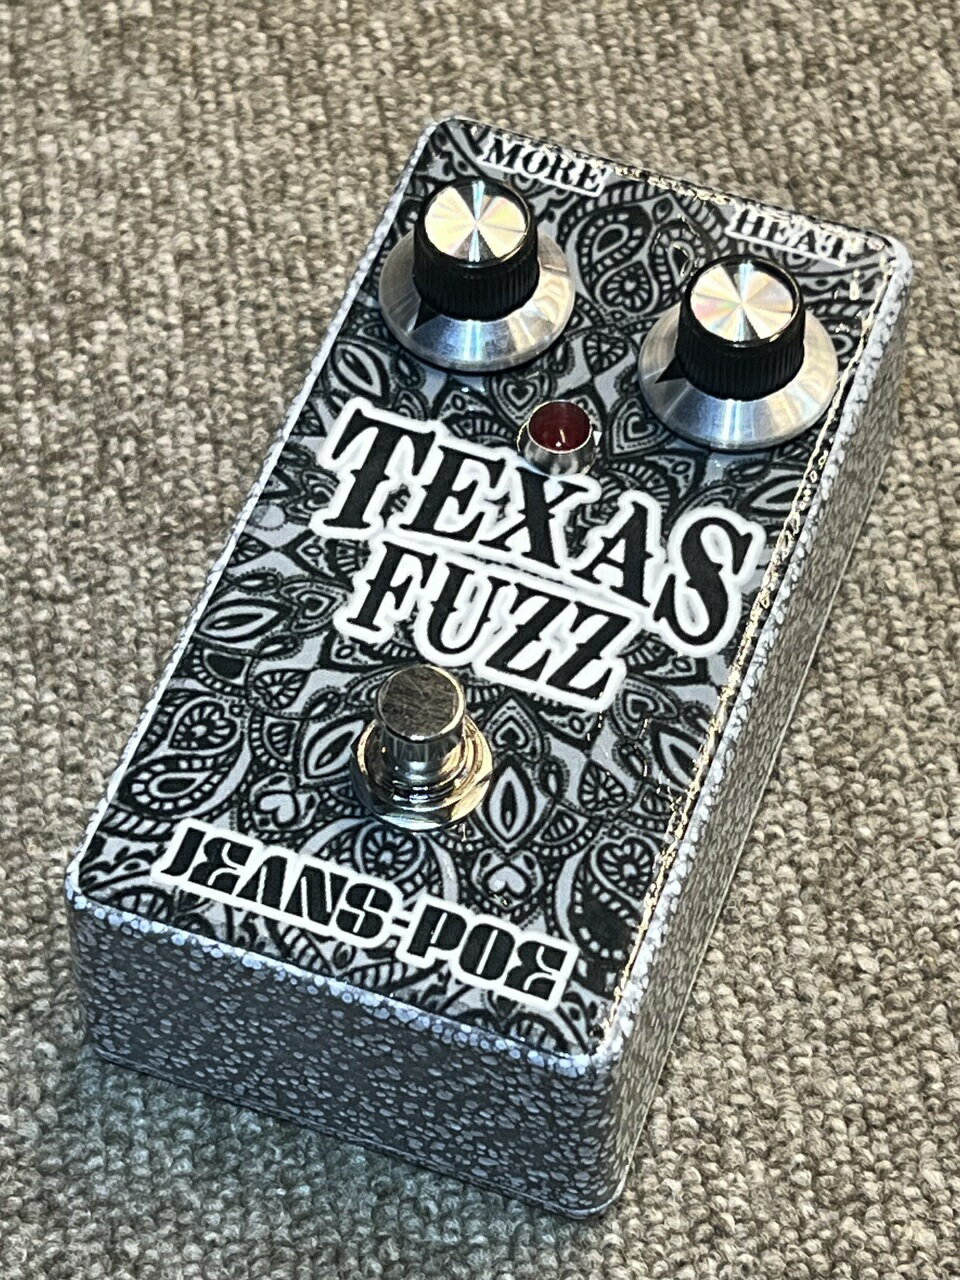 WES JEANS 【Dias Squarefaceのオマージュファズ】Texas Fuzz Jeans Poe NTE123 #015【G-CLUB 渋谷店】